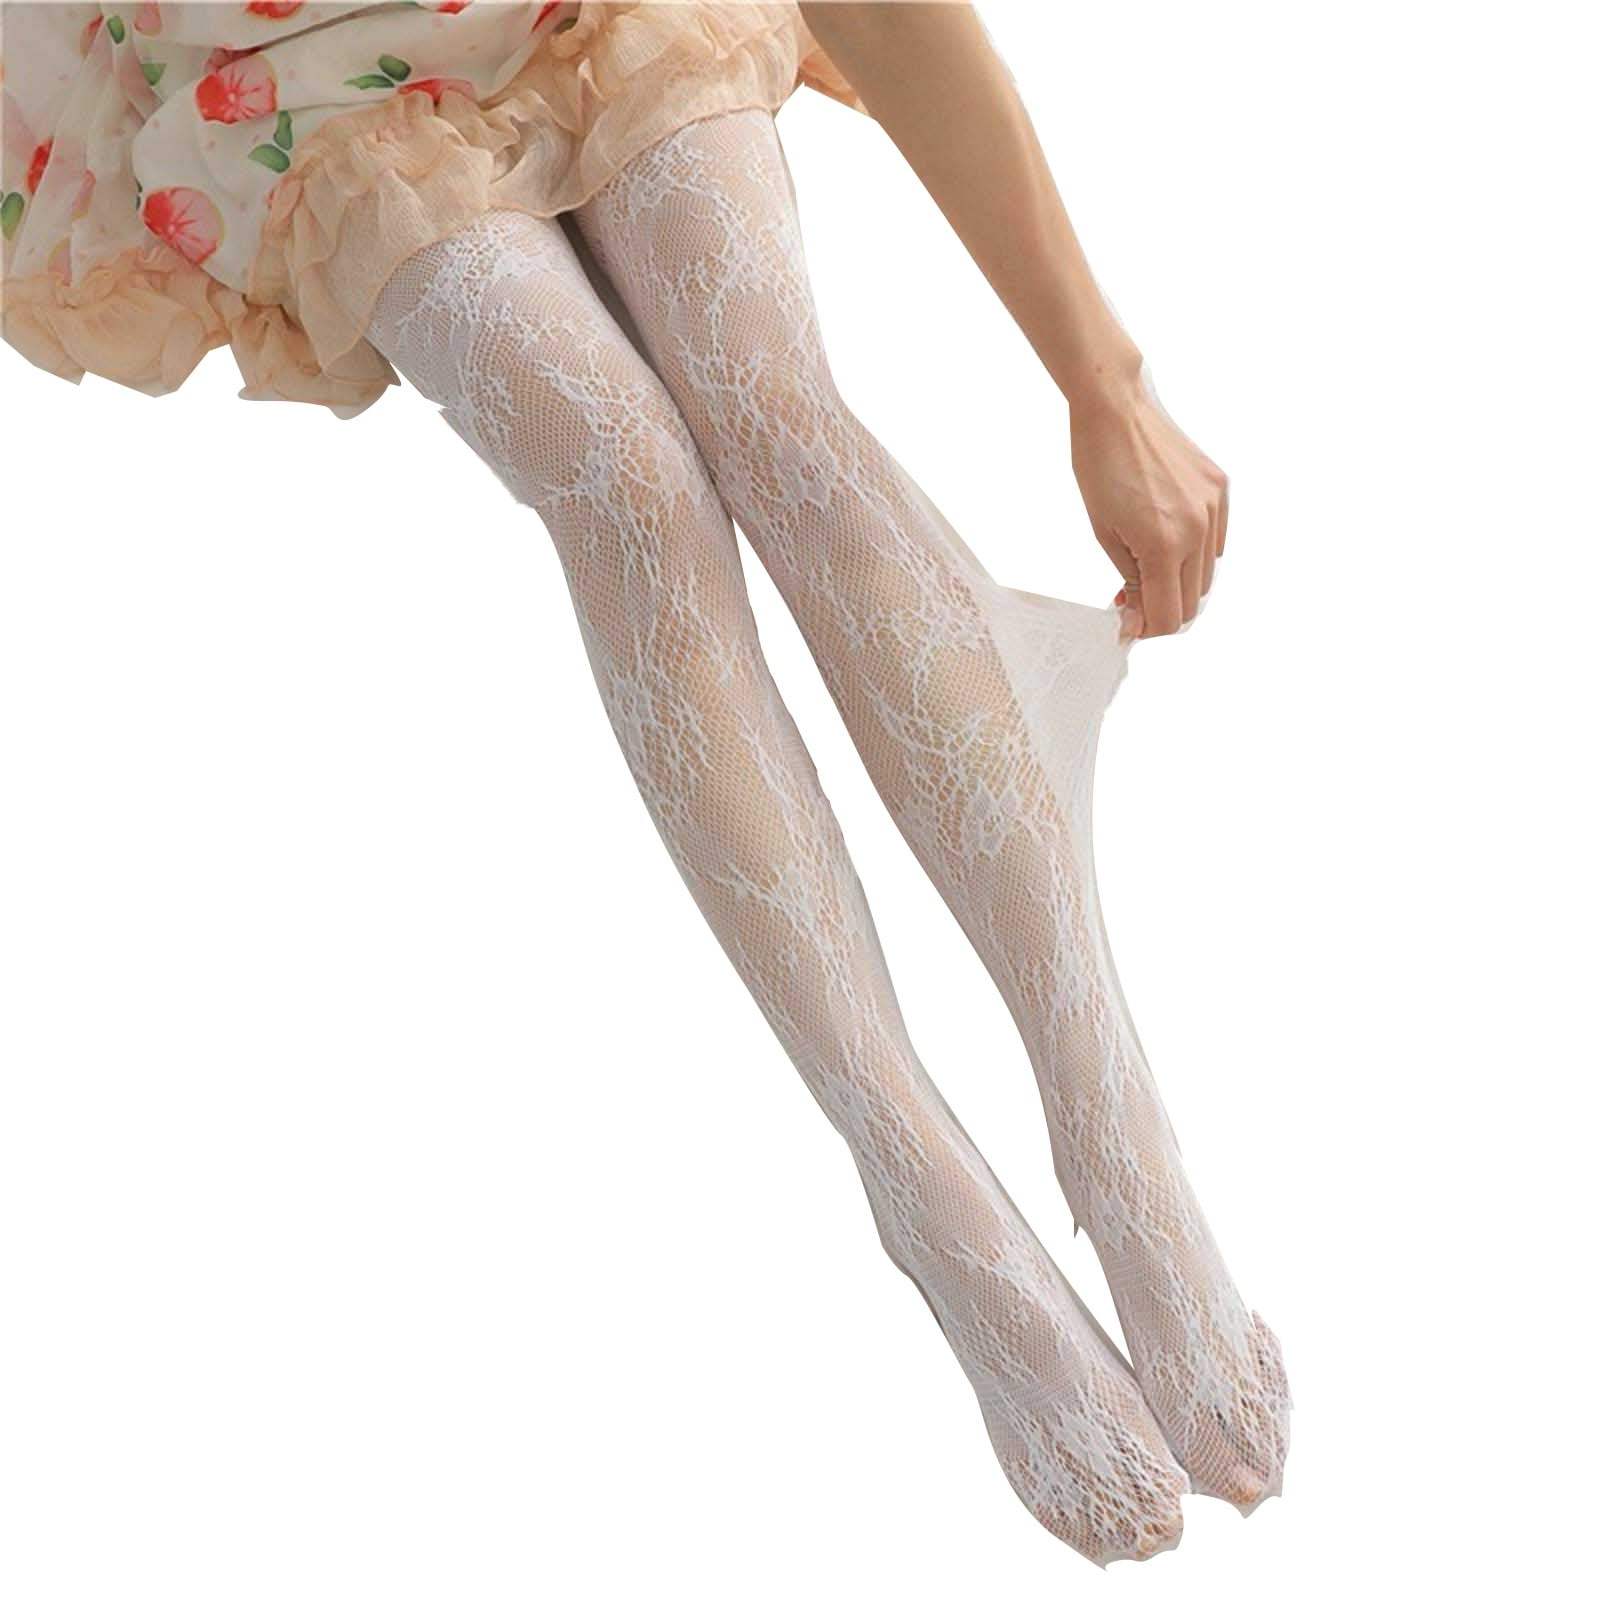 Meidiya Lace Patterned Tights Floral Stockings Pattern Leggings Tights Net  Pantyhose for Women and Girls Supplies